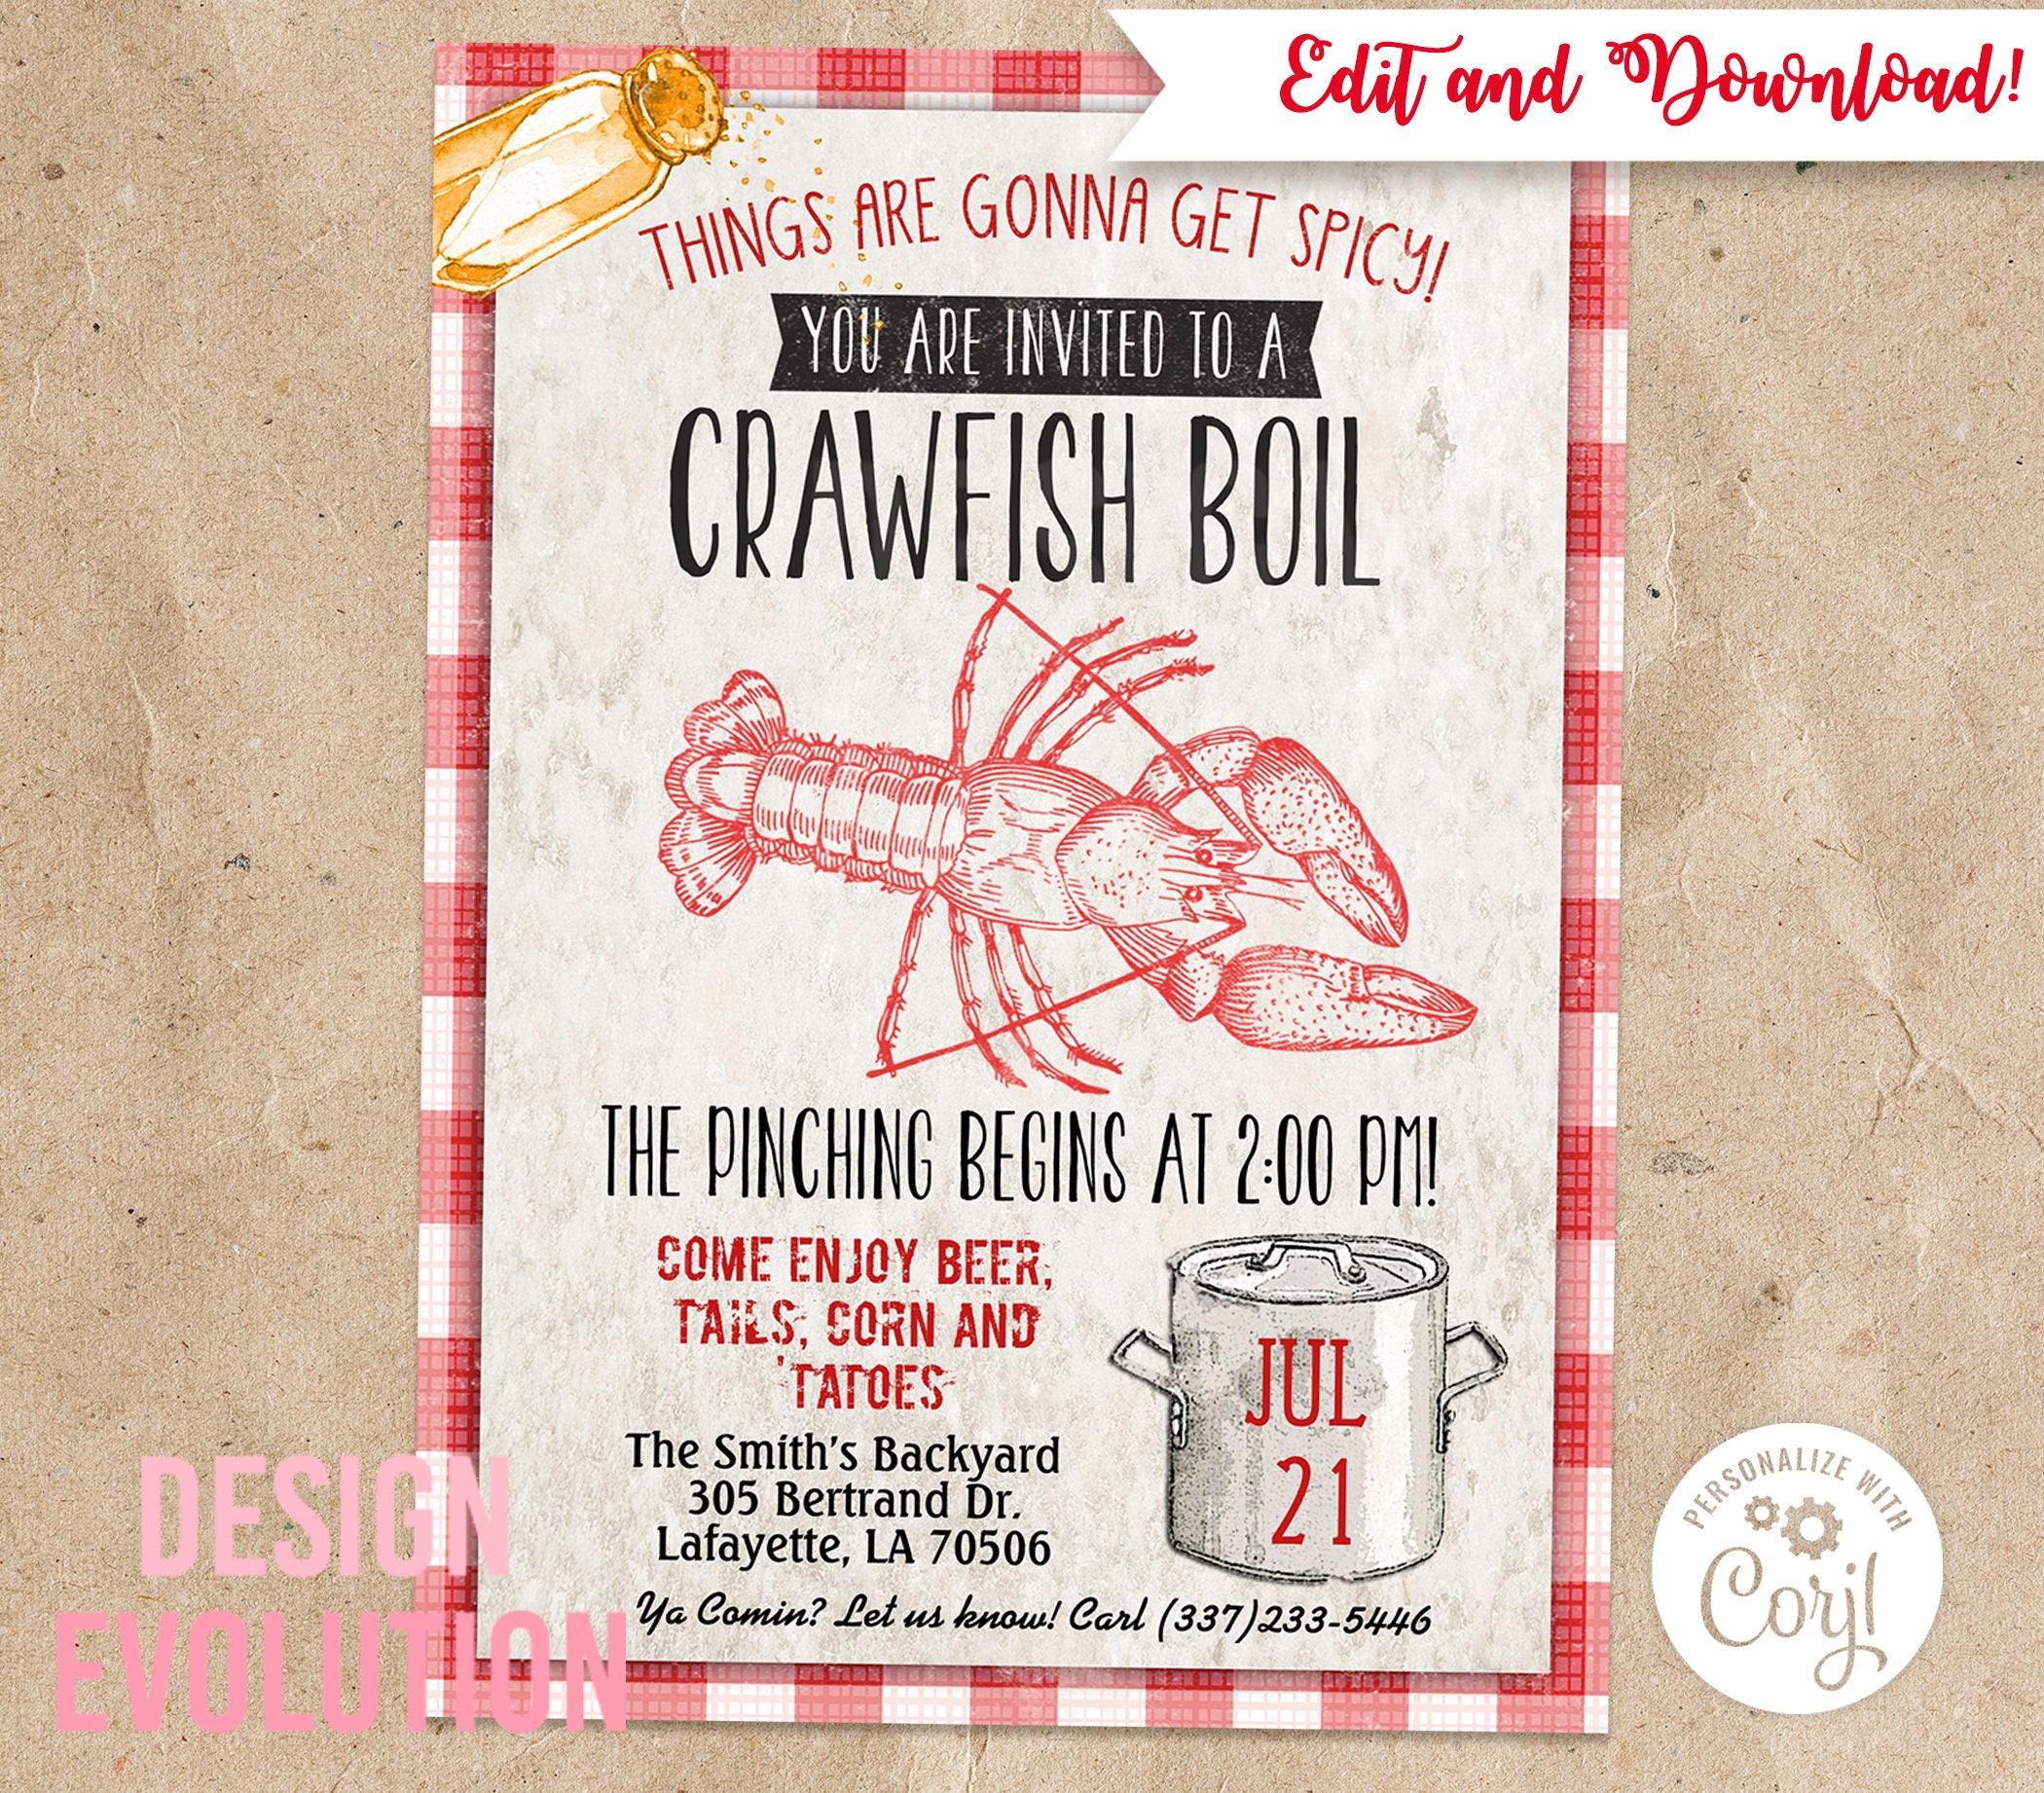 TRY THE DEMO Crawfish Boil Crayfish Boil Crayfish Party